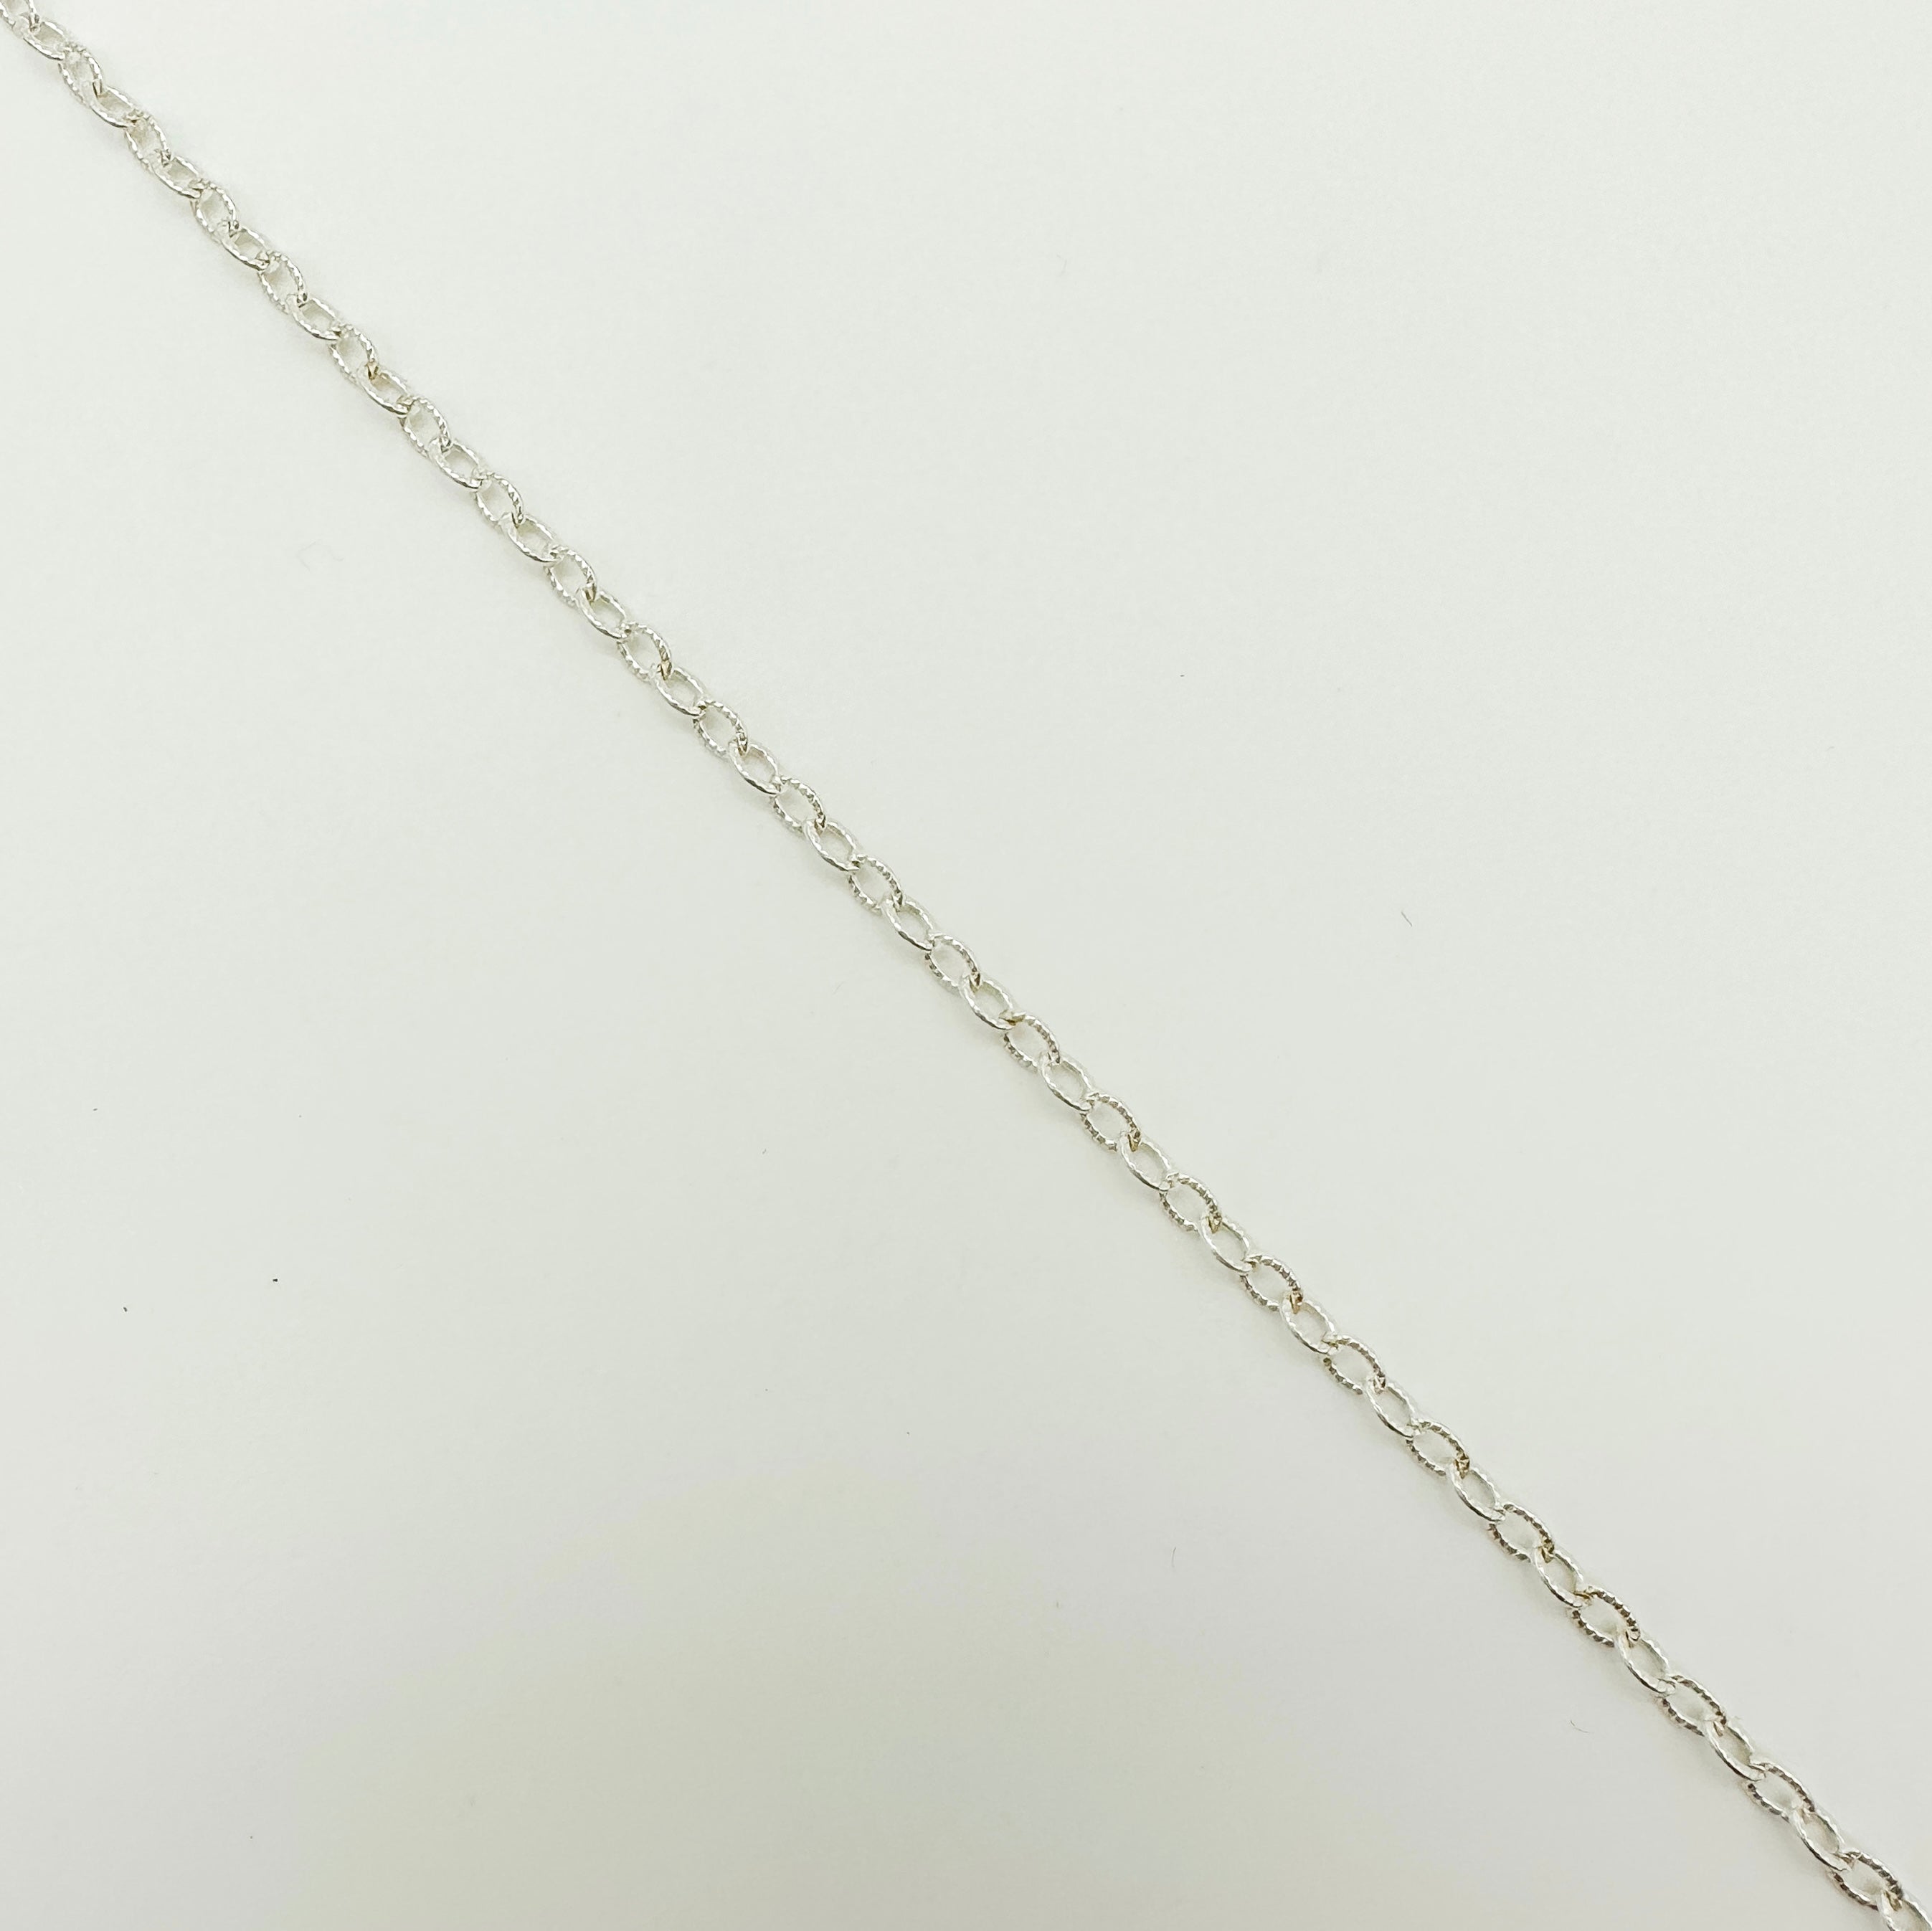 textured cable chain / sterling silver chain / wholesale chain / permanent jewelry supplier / permanent jewelry chain